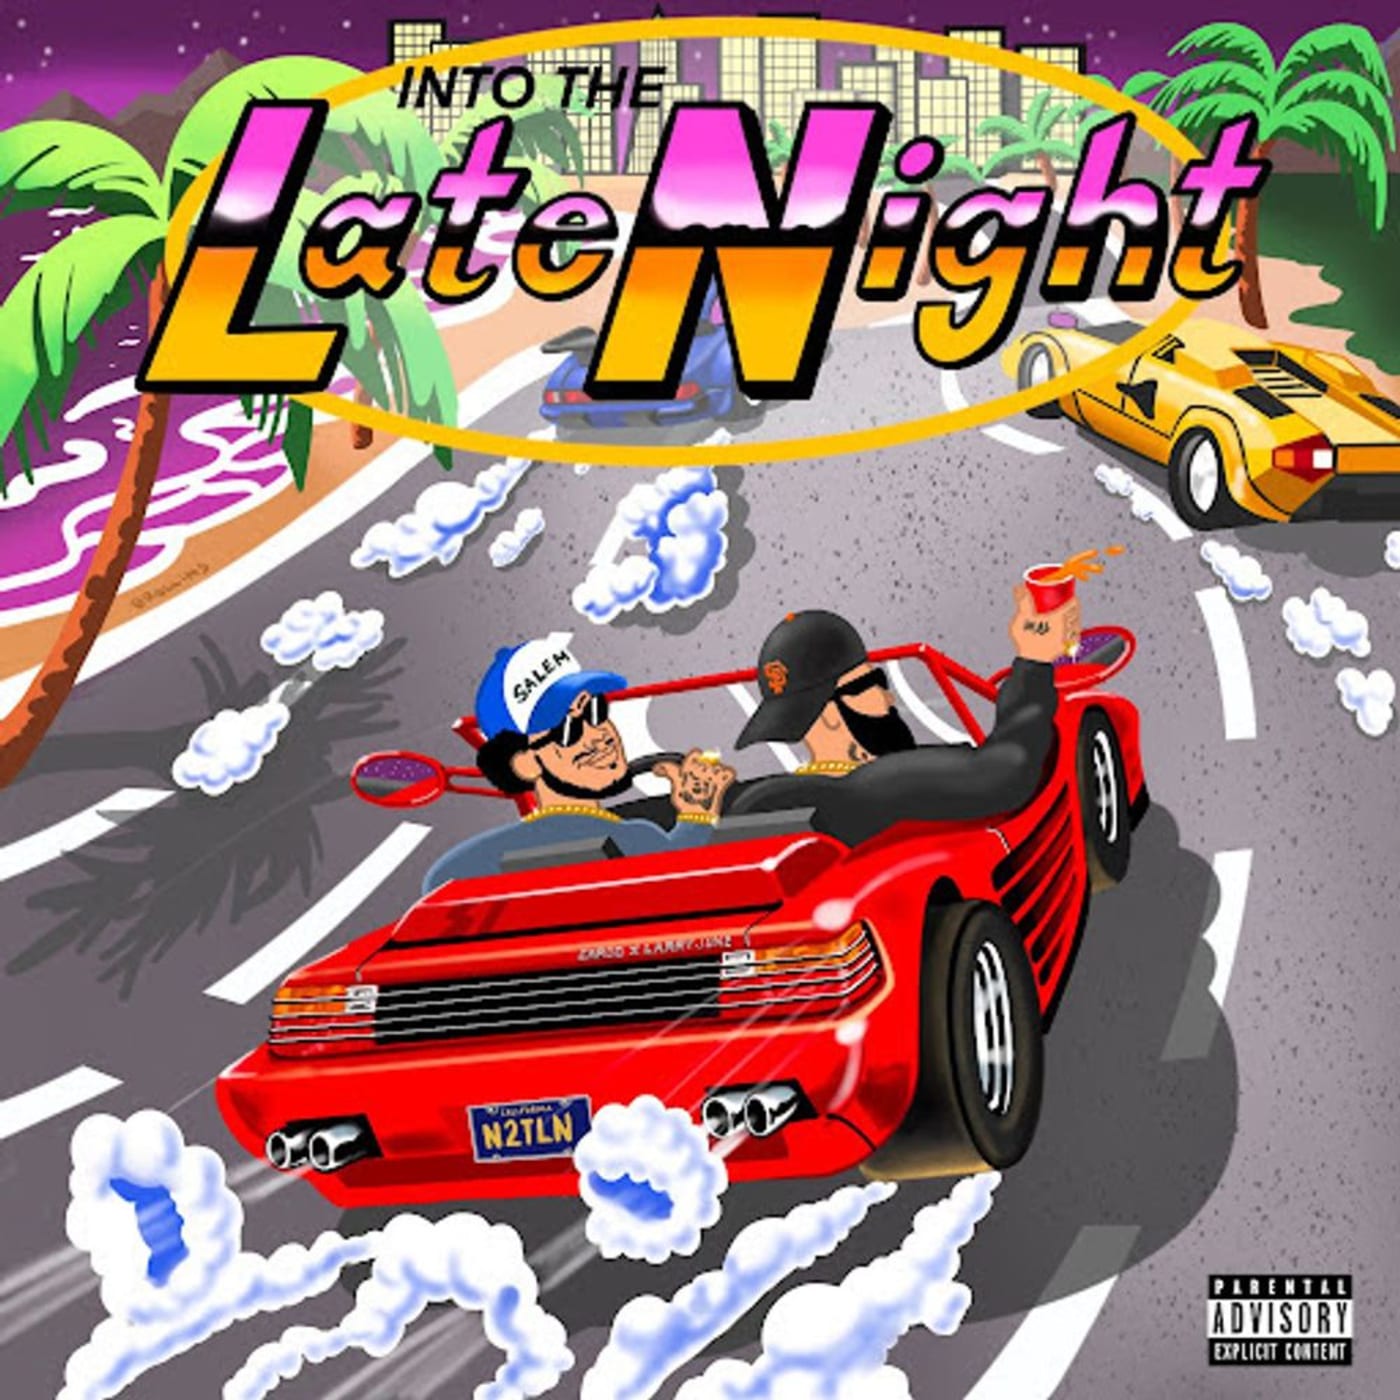 Larry June & Cardo – Into the Late Night (Album Review)